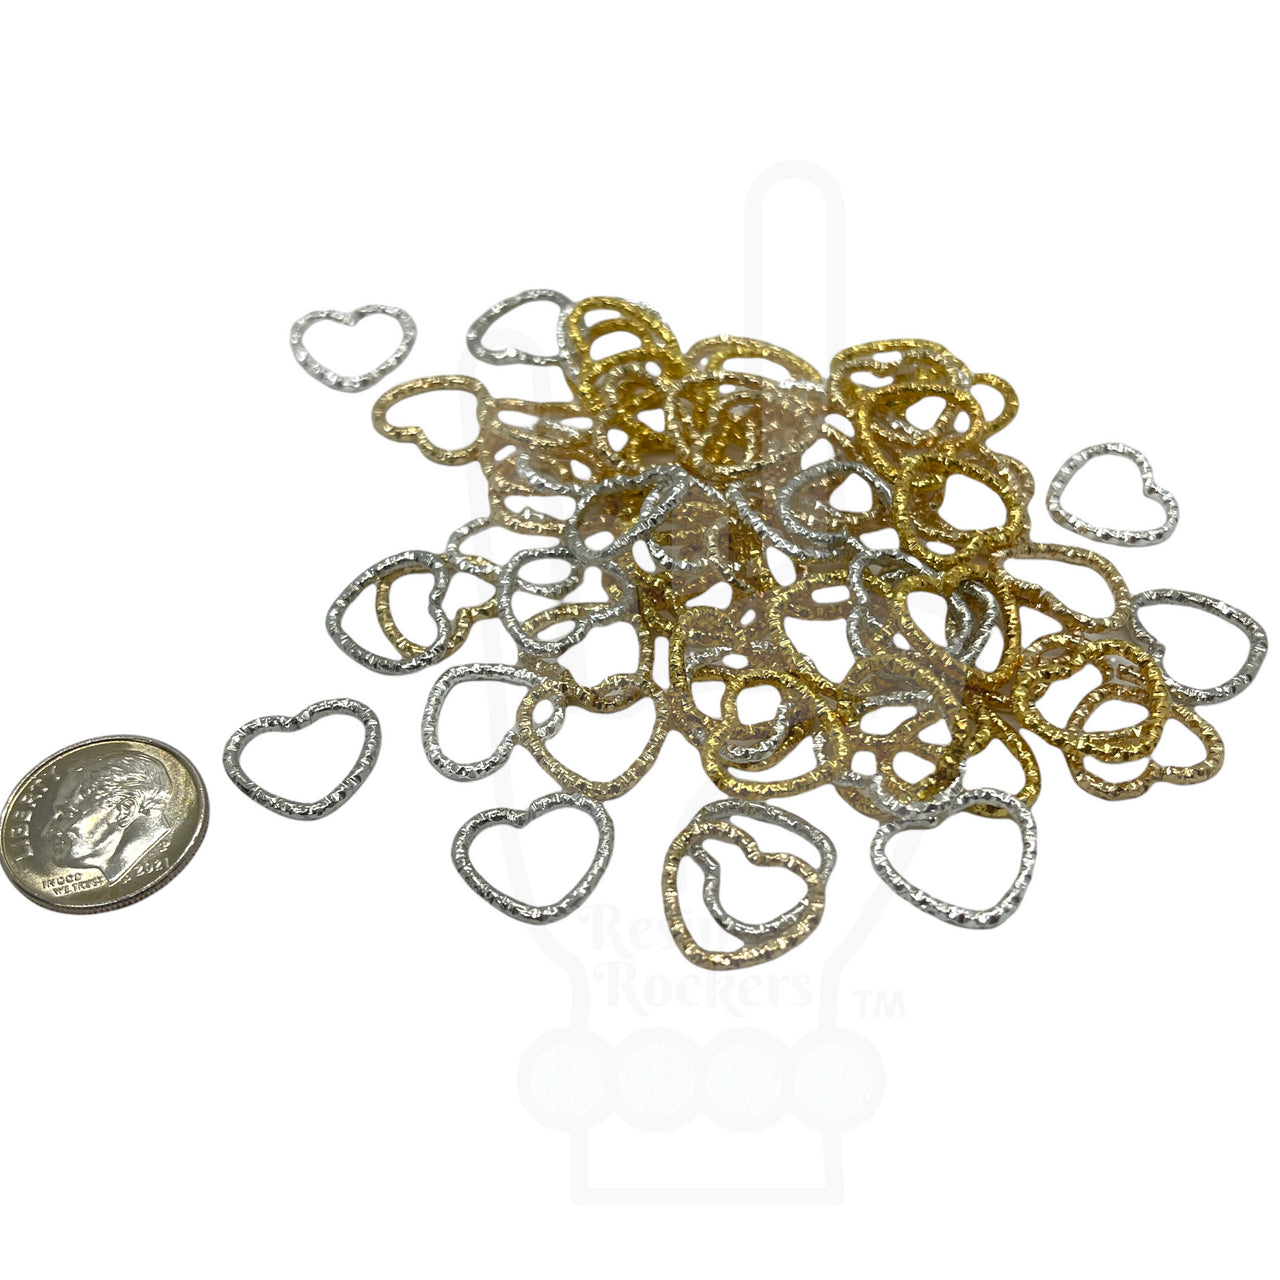 Riveted Jump Ring Shapes for Pen Charms Pack of 50